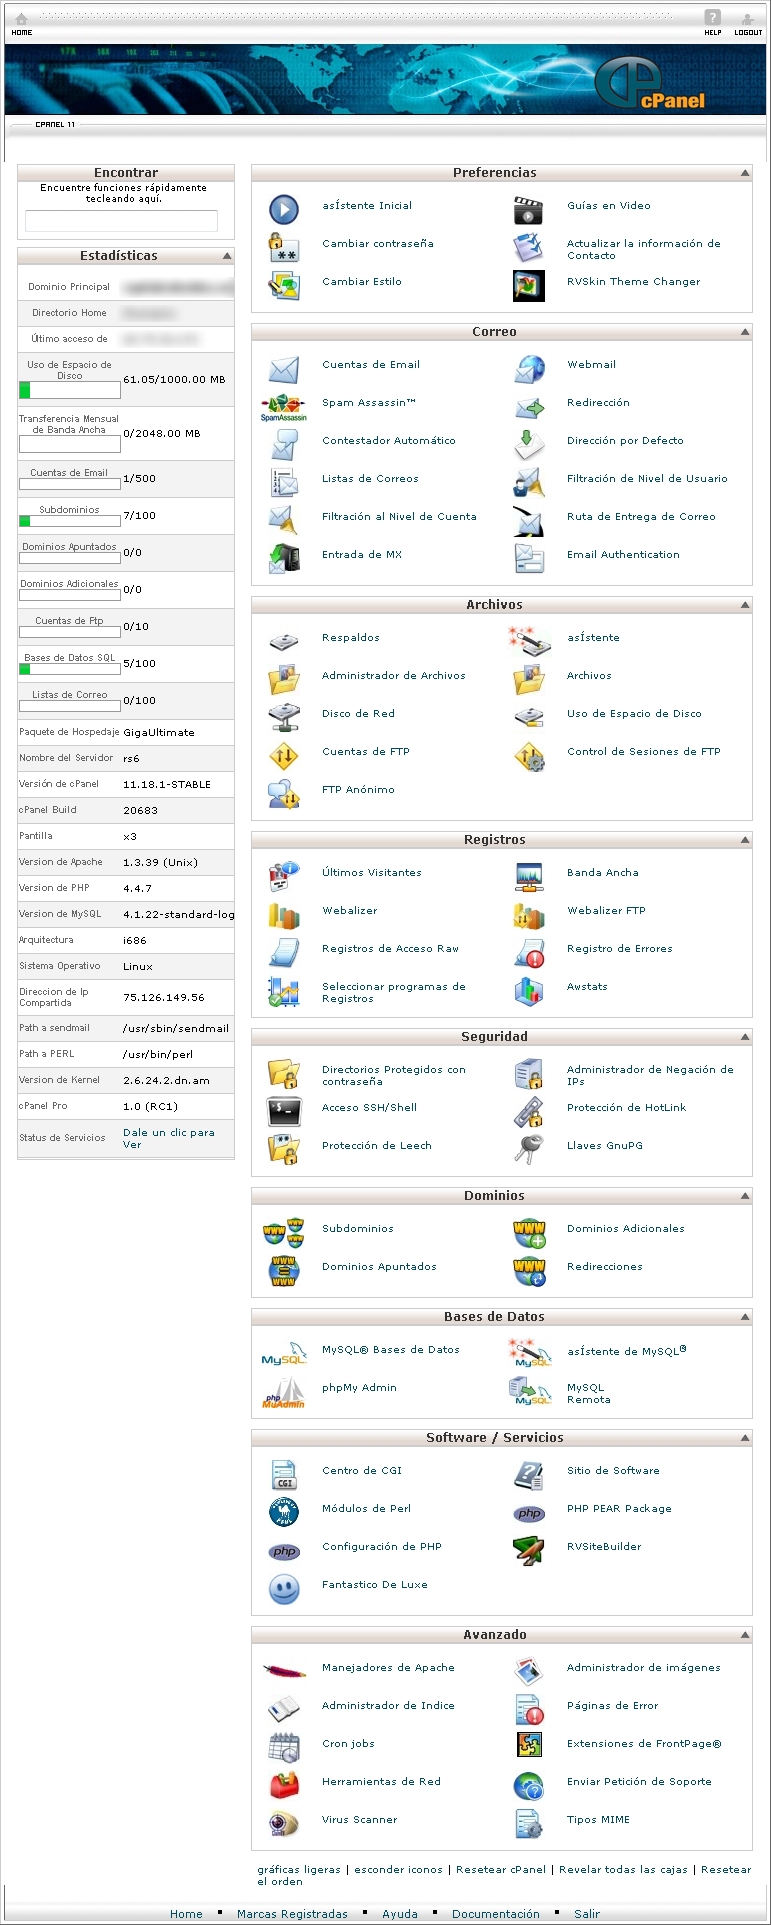 CPANEL Capital Colombia